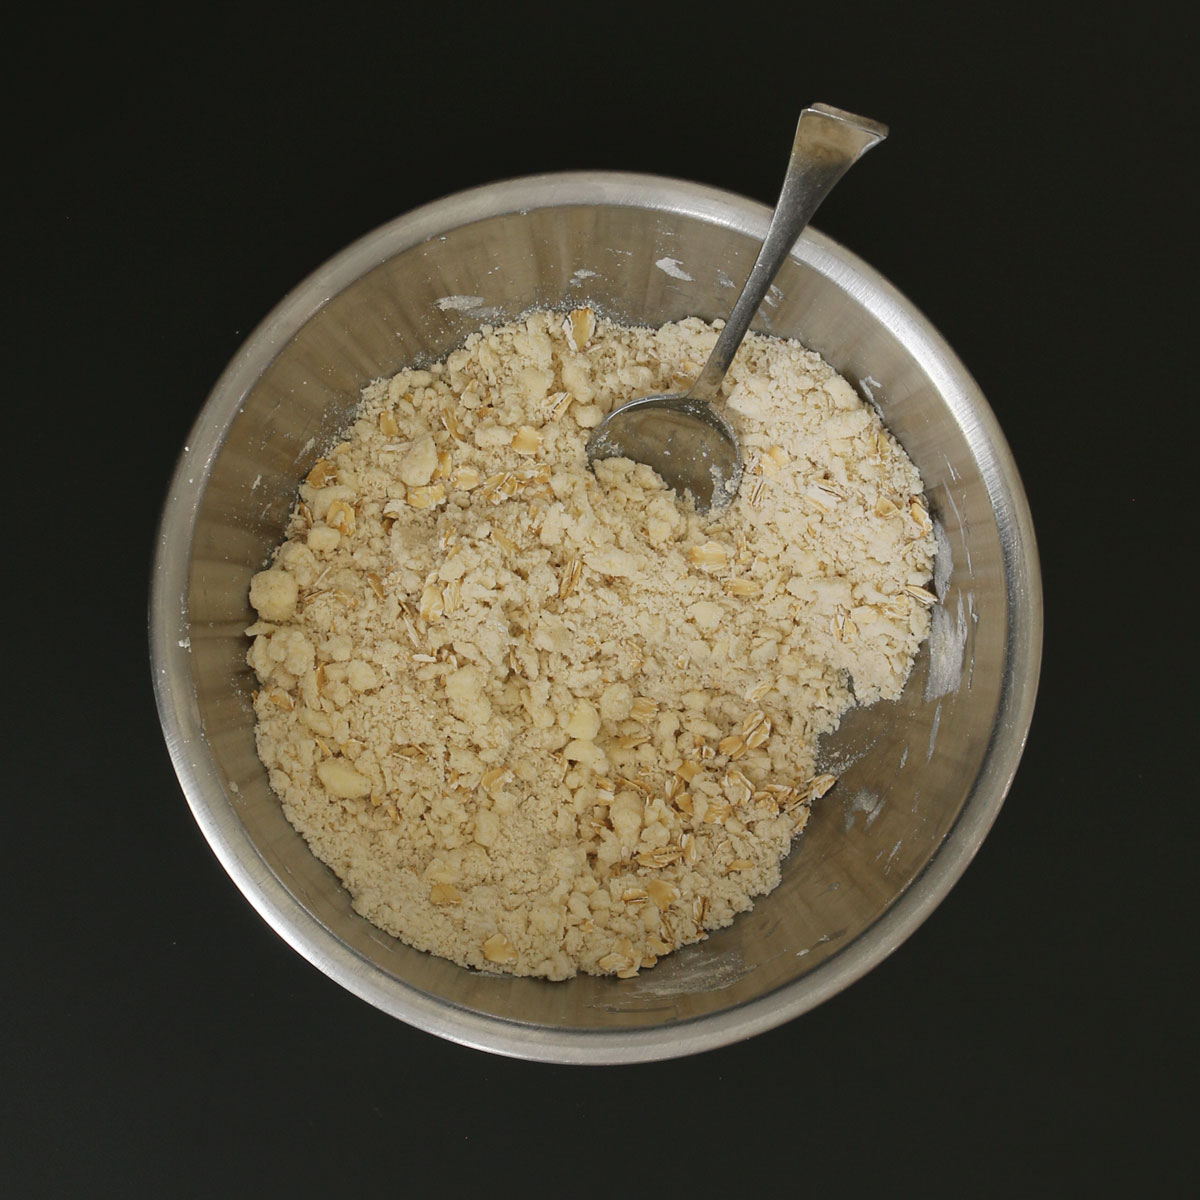 spoon stirring together the oats and butter crumb mixture.